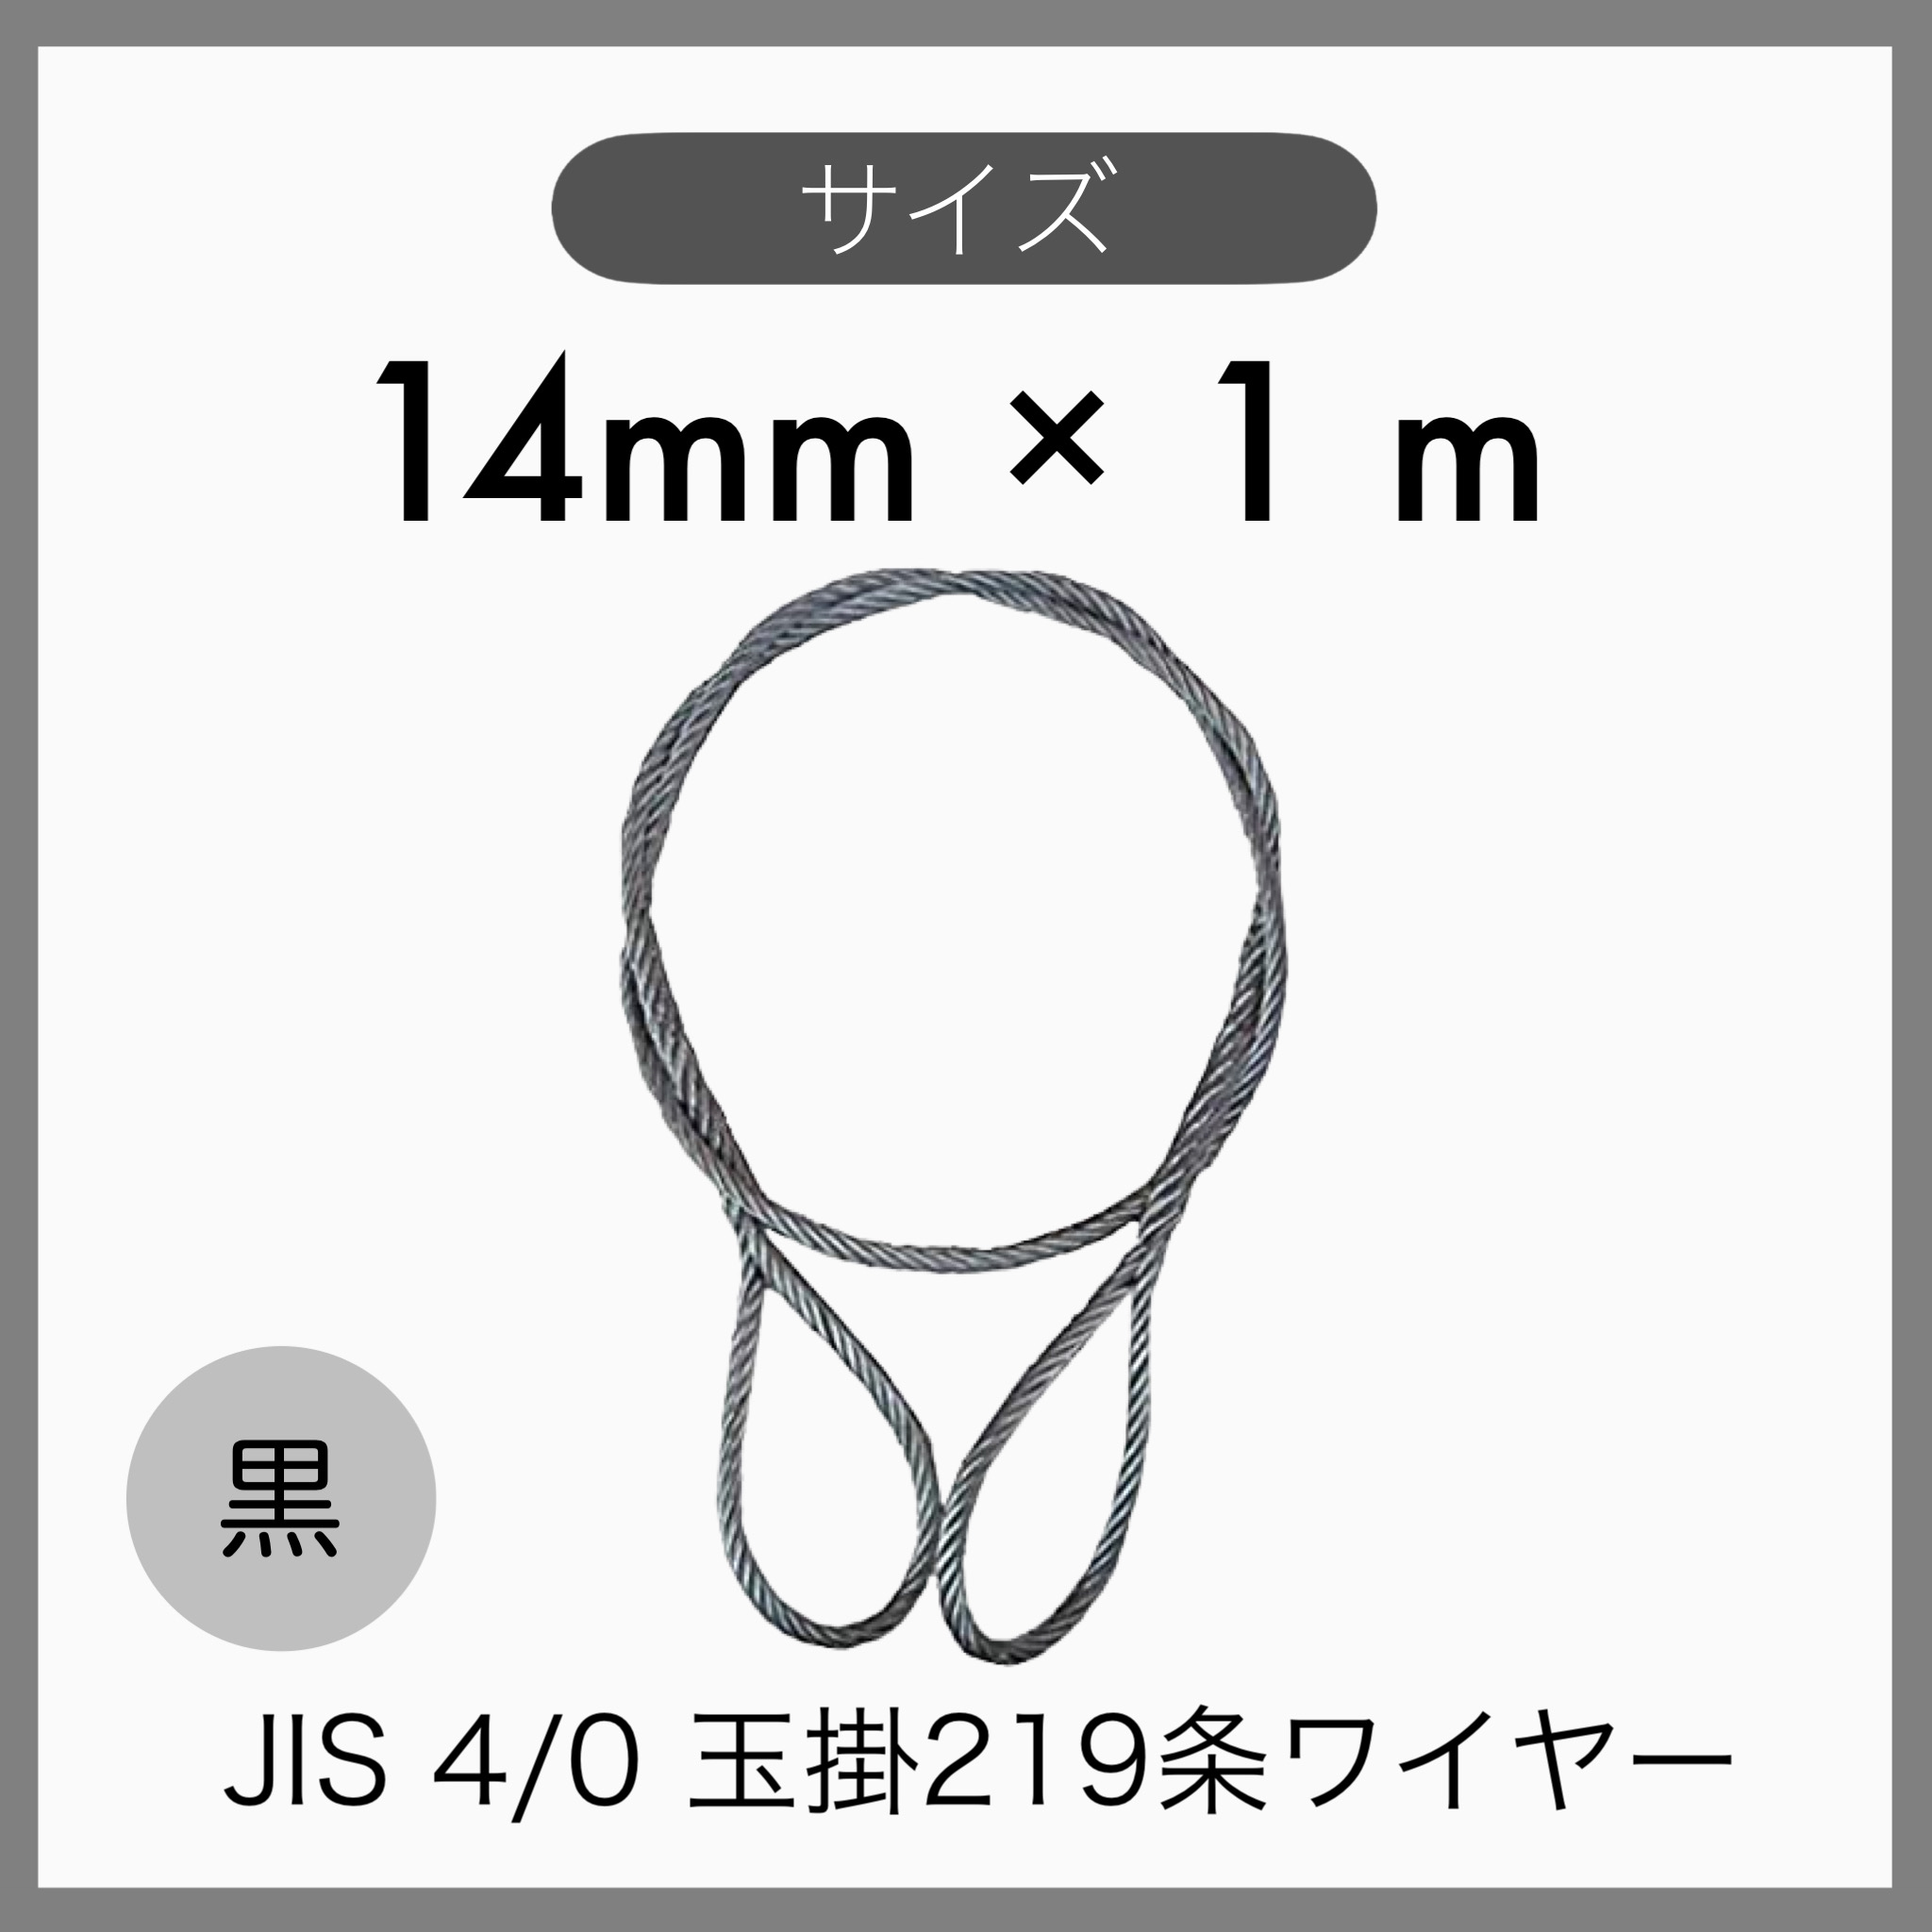 10 pcs set JIS O/O black sphere .. wire sphere ..219 article wire knitting imported goods 14mm×1m